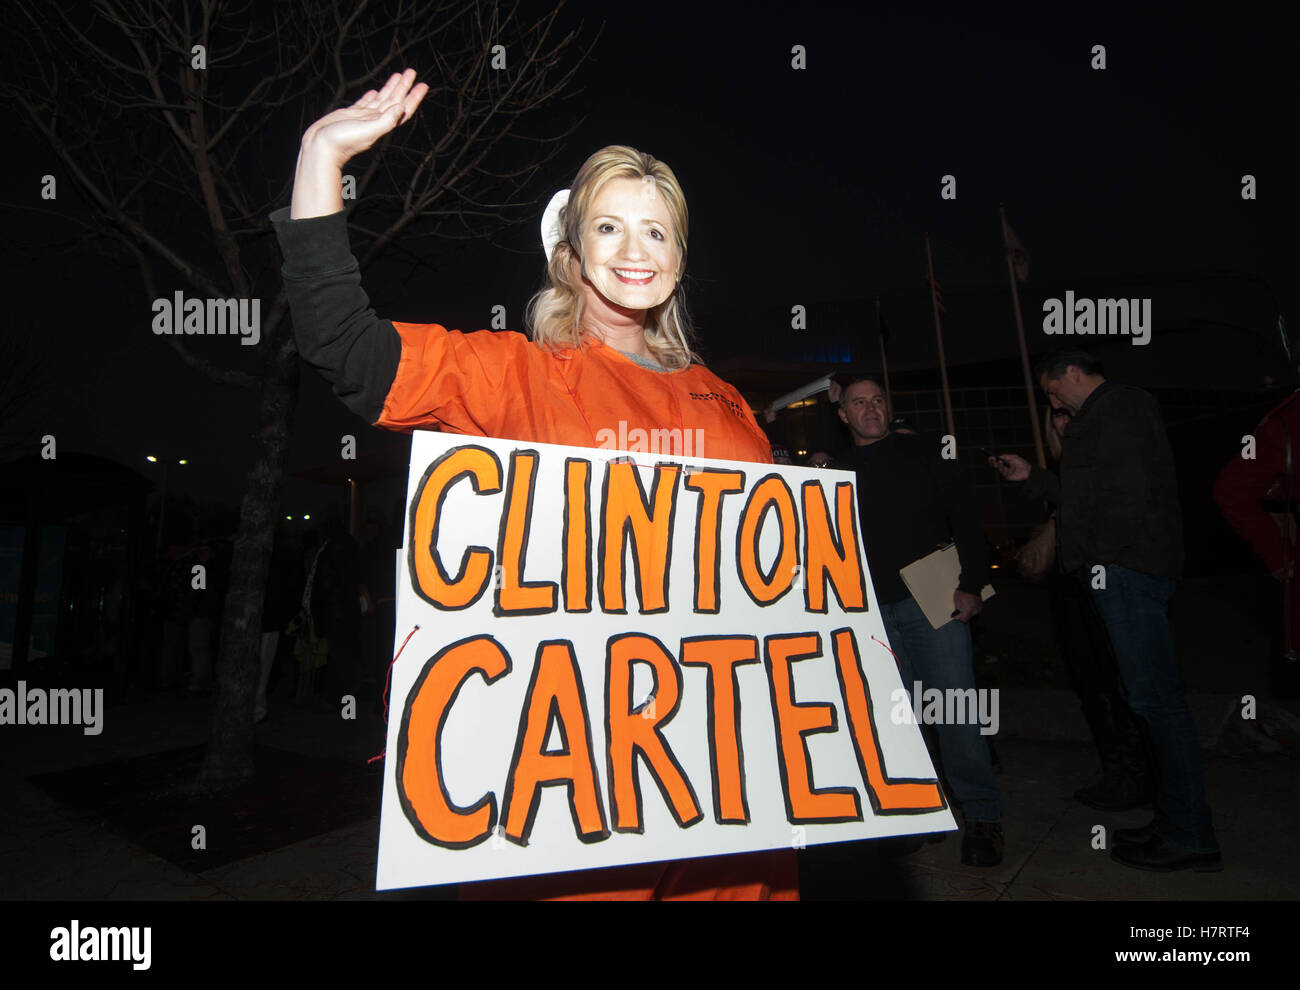 Manchester, New Hampshire, USA. 7th Nov, 2016. A woman in a Hillary Clinton inmate costume waves to traffic before a Donald Trump rally in Manchester, N.H. Credit:  Andrew Cline/Alamy Live News Stock Photo